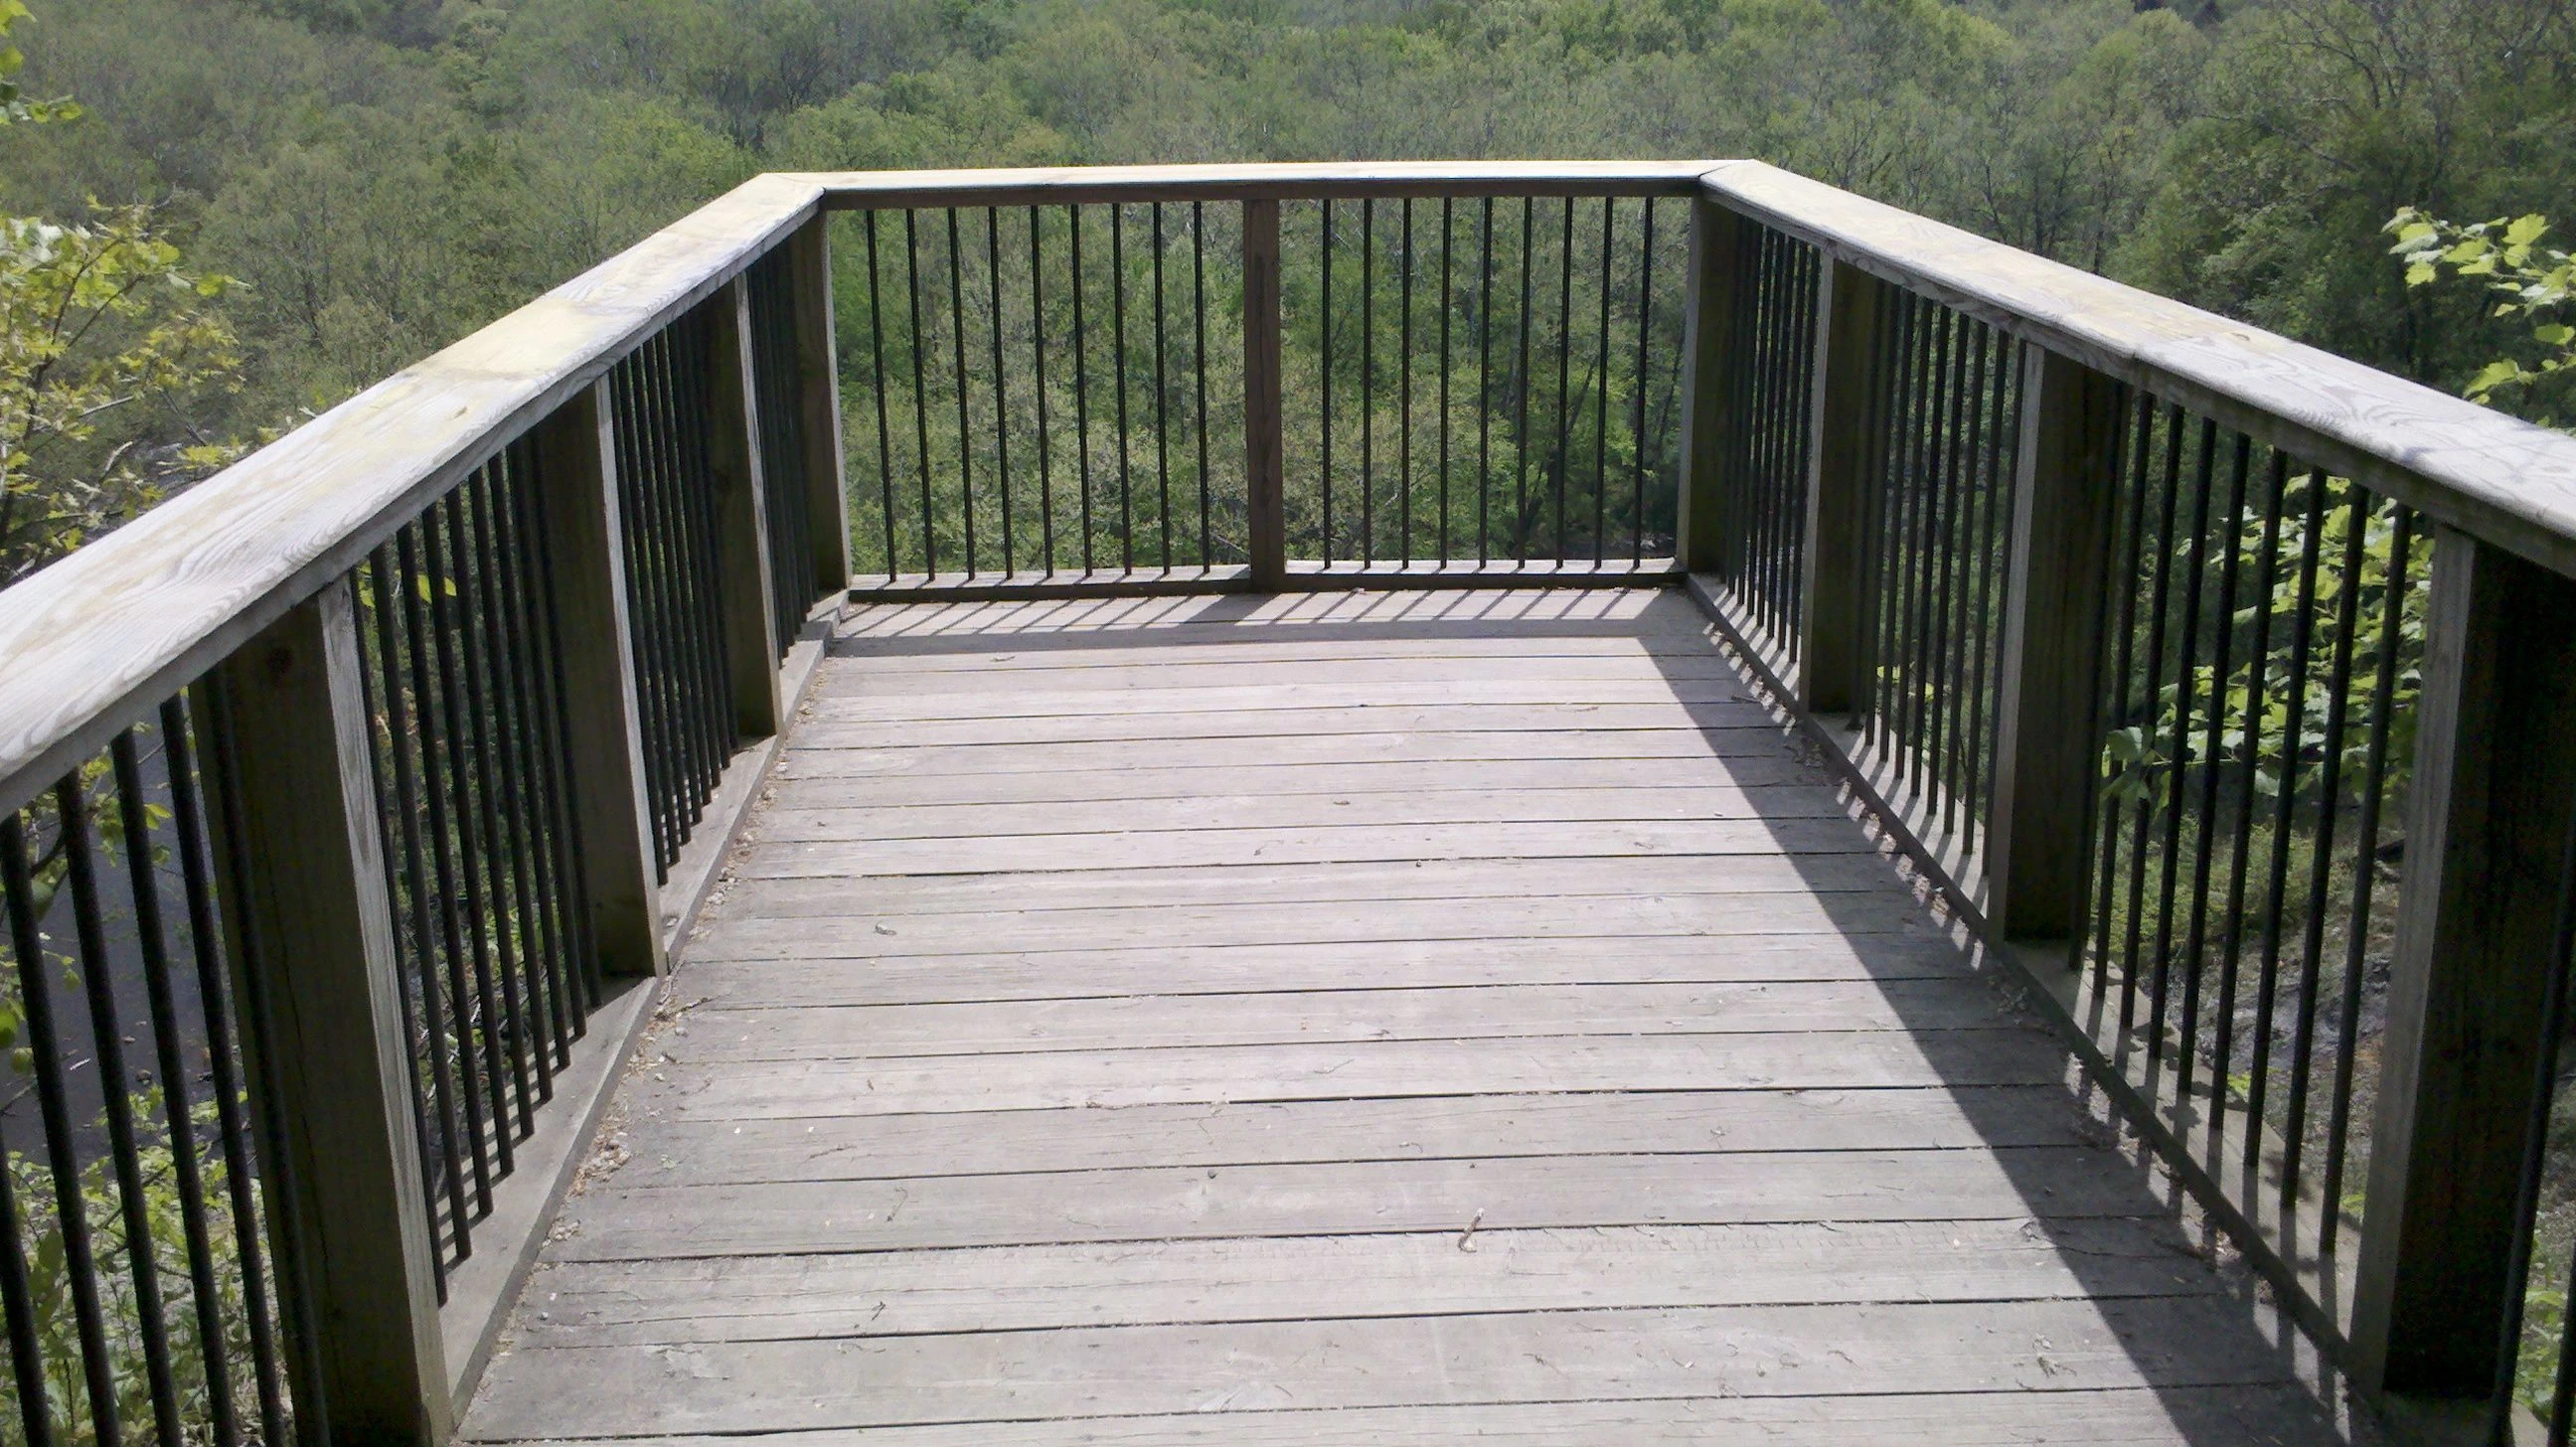 The overlook deck where you can look onto the Cuyahoga River